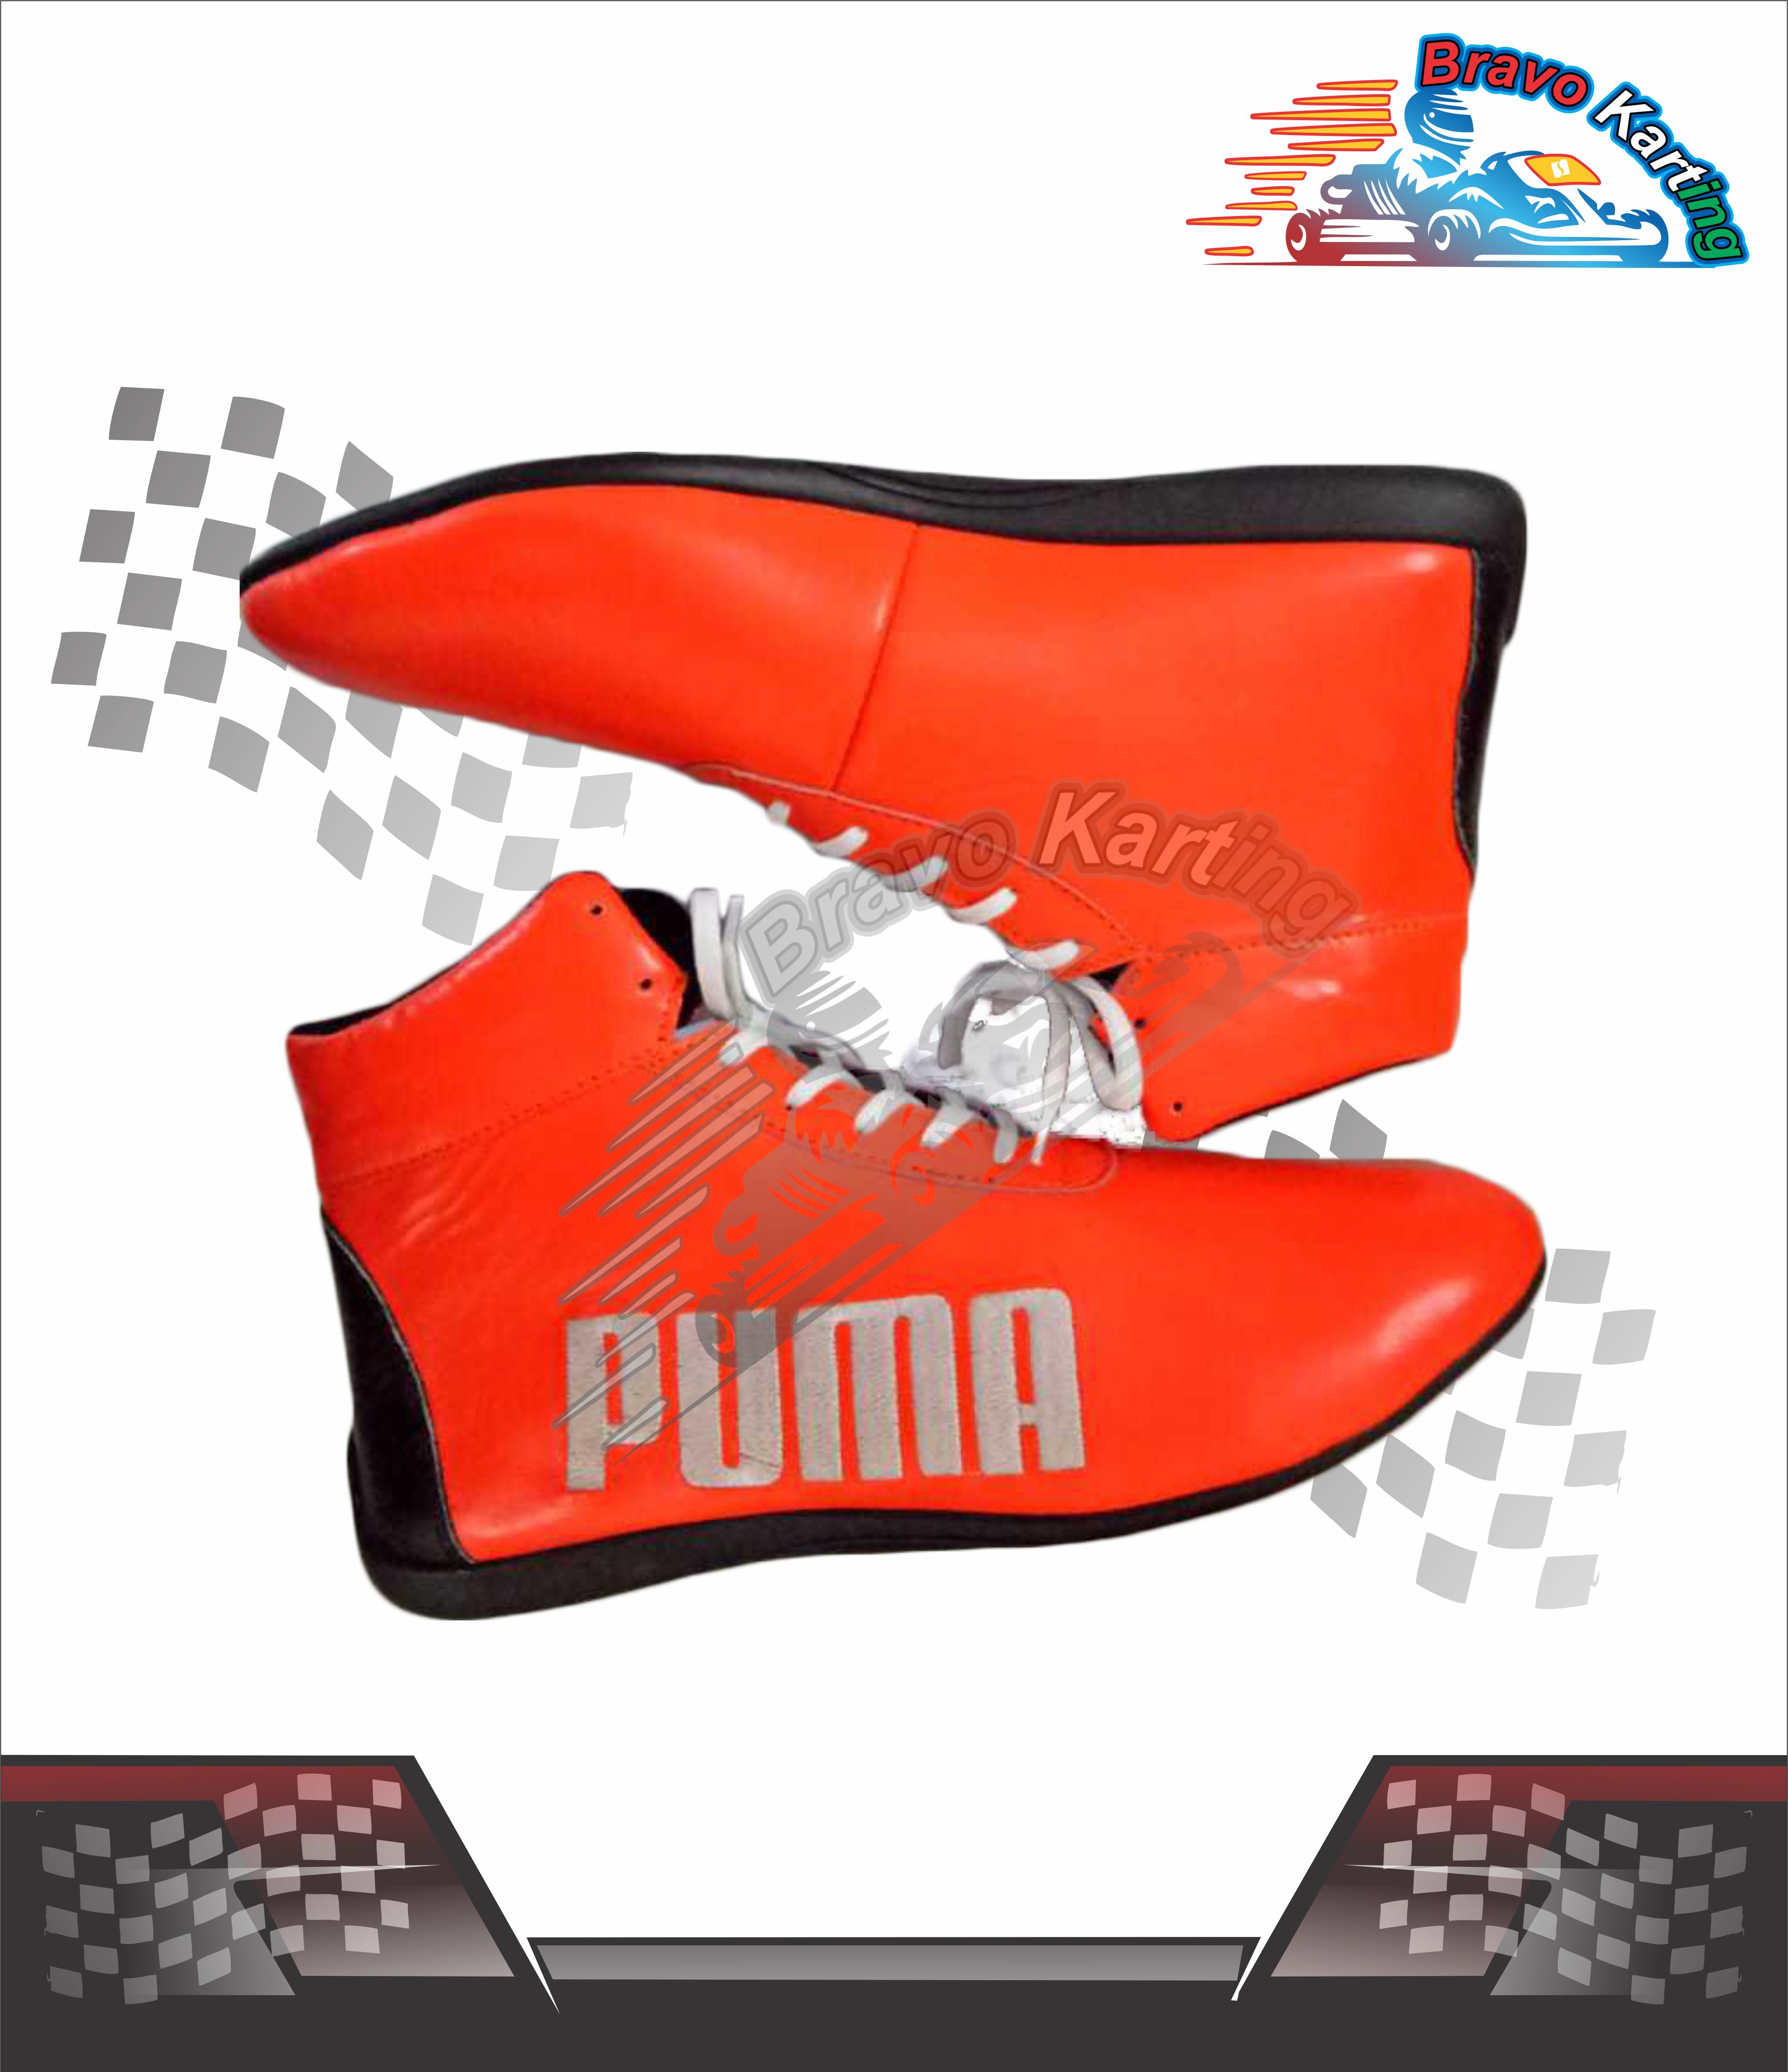 Go Kart race Shoes / Boot M/O Artificial Leather Replica